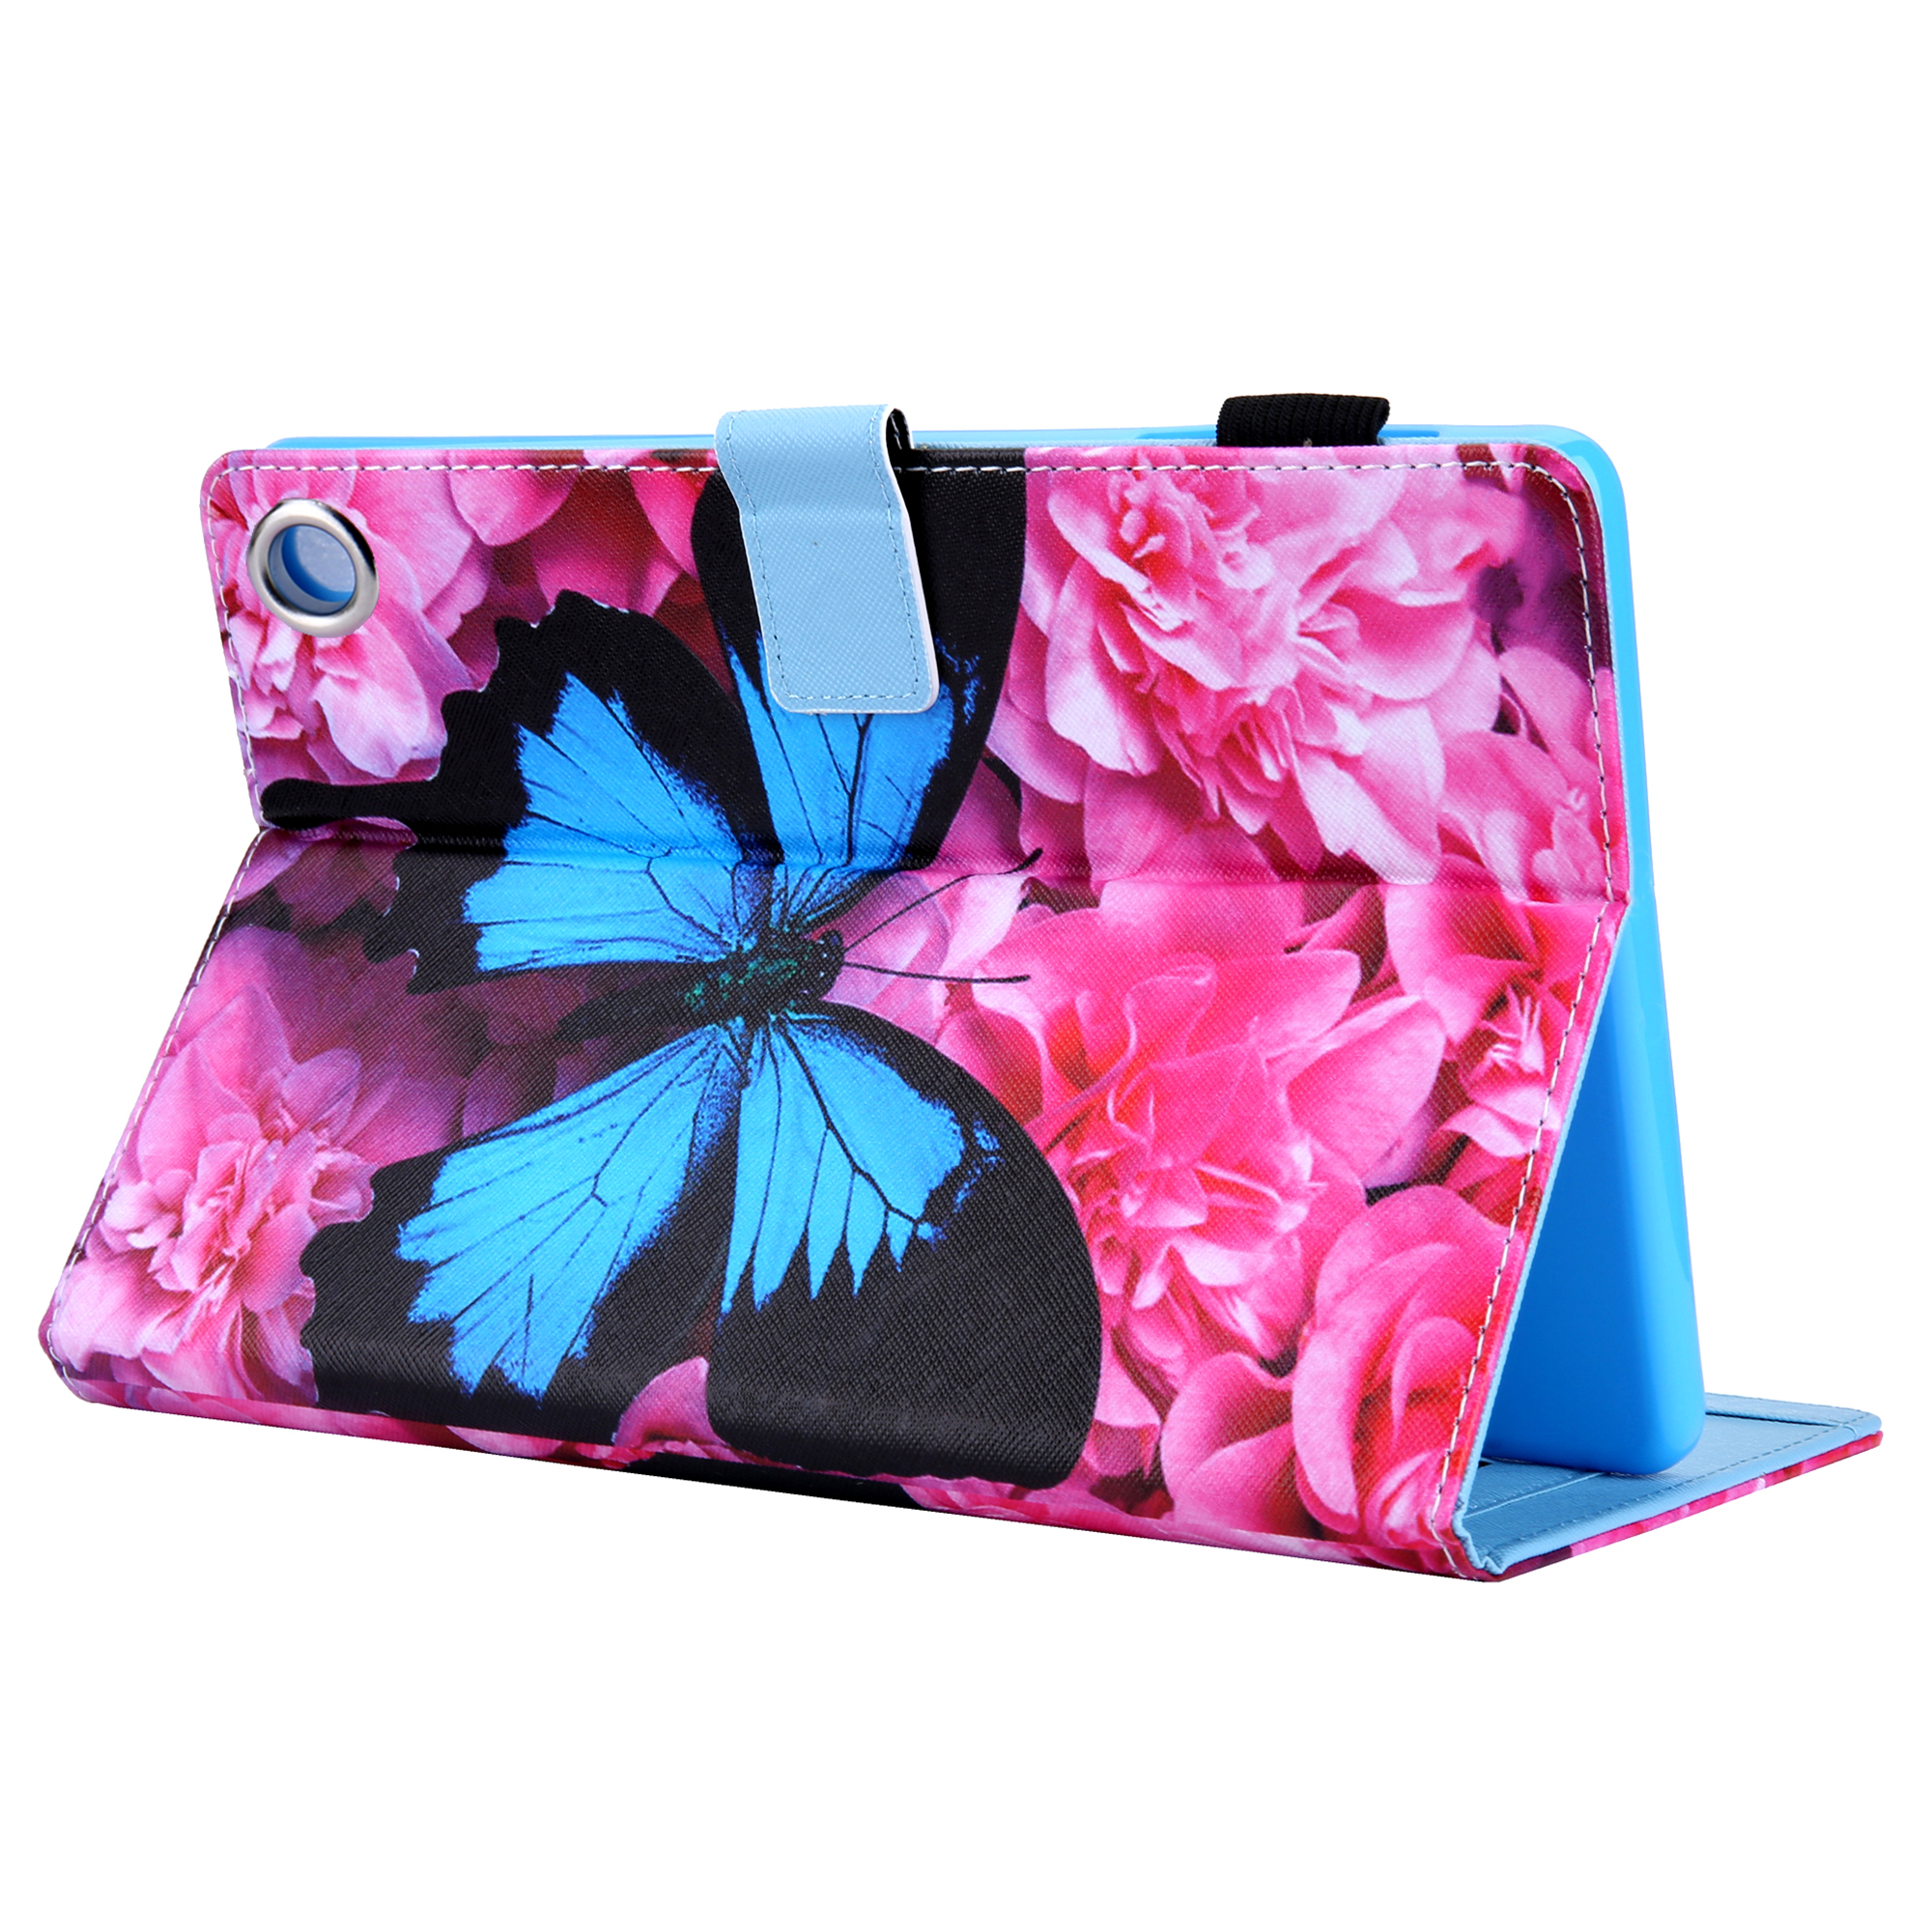 Fire HD 8 Case 2020, Fire HD 8 Plus Case 2020, Allytech PU Leather Slim Shockproof Auto Sleep Wake Folio Flip Smart Cover Pencil Holder Book Style Case for All-New Fire HD 8 10th Gen,Butterfly - image 5 of 7